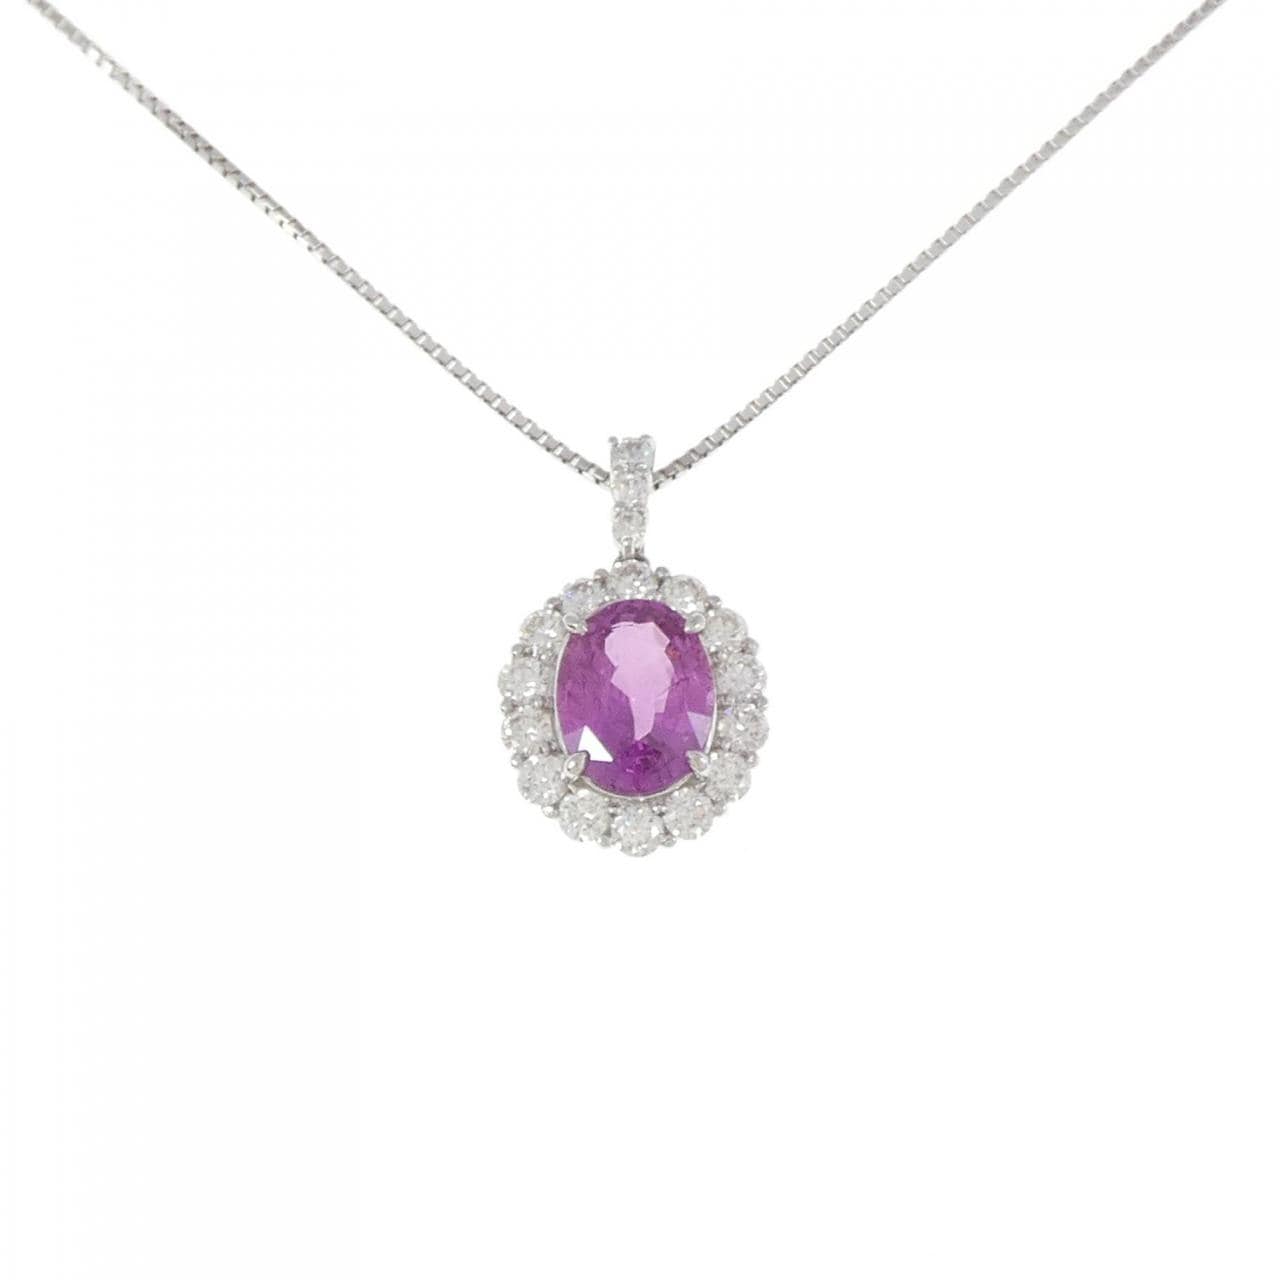 [Remake] PT Sapphire Necklace 3.46CT Made in Sri Lanka